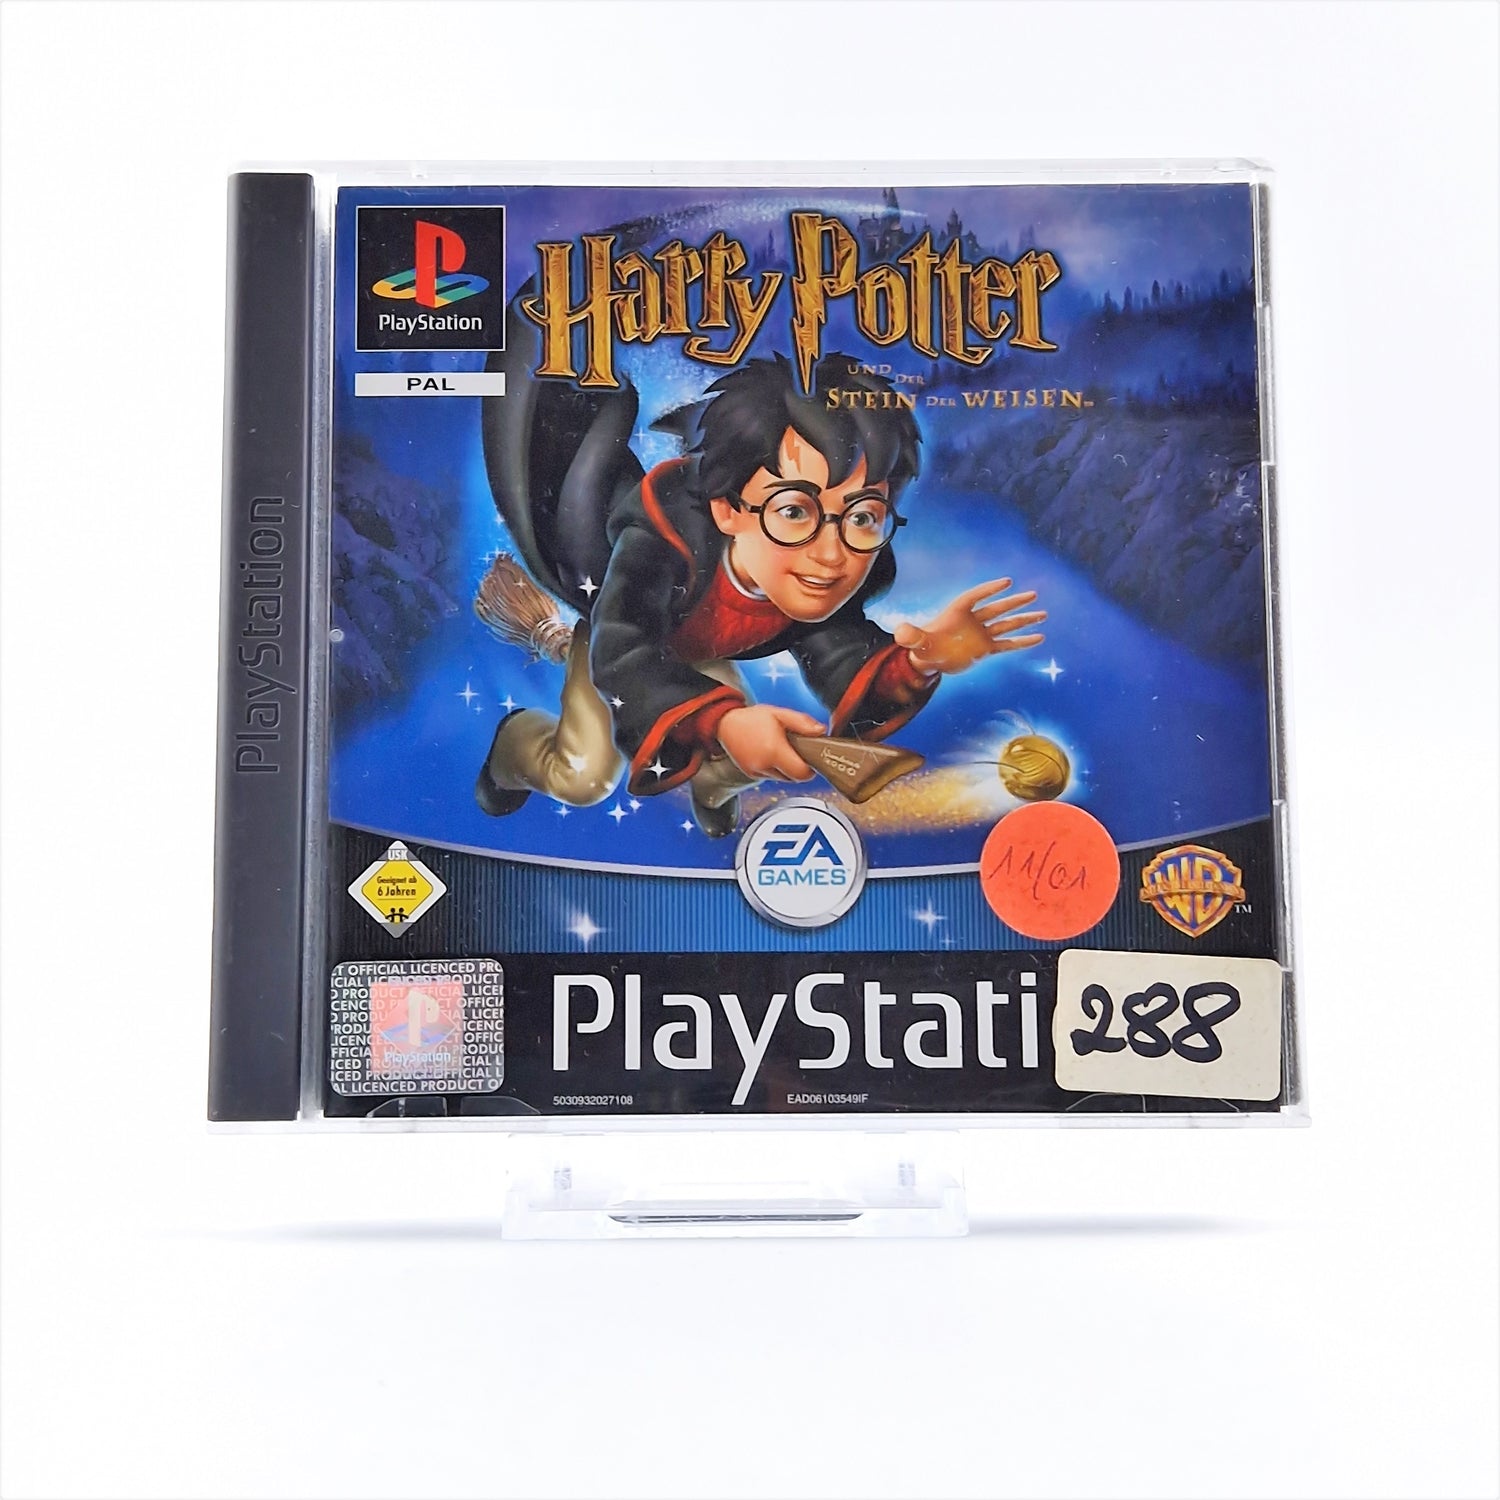 Playstation 1 game: Harry Potter and the Philosopher's Stone - Sony PS1 PSX / original packaging